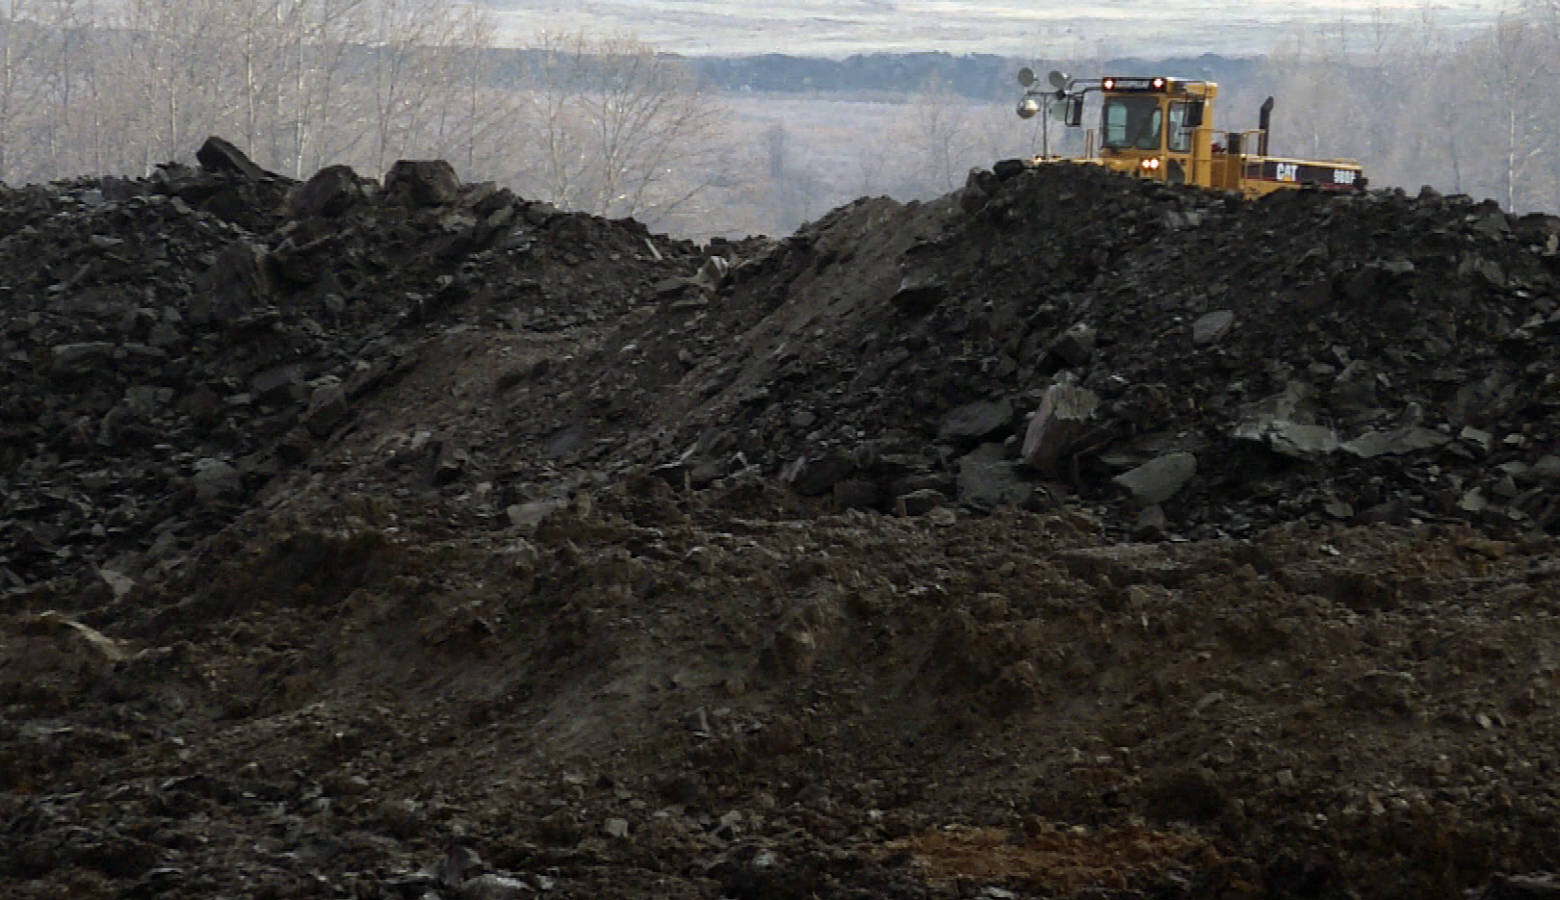 The U.S. Energy Information Administration shows overall coal production in the U.S. last year was the lowest it's been since 1965. (FILE PHOTO: Barbara Brosher/WTIU)